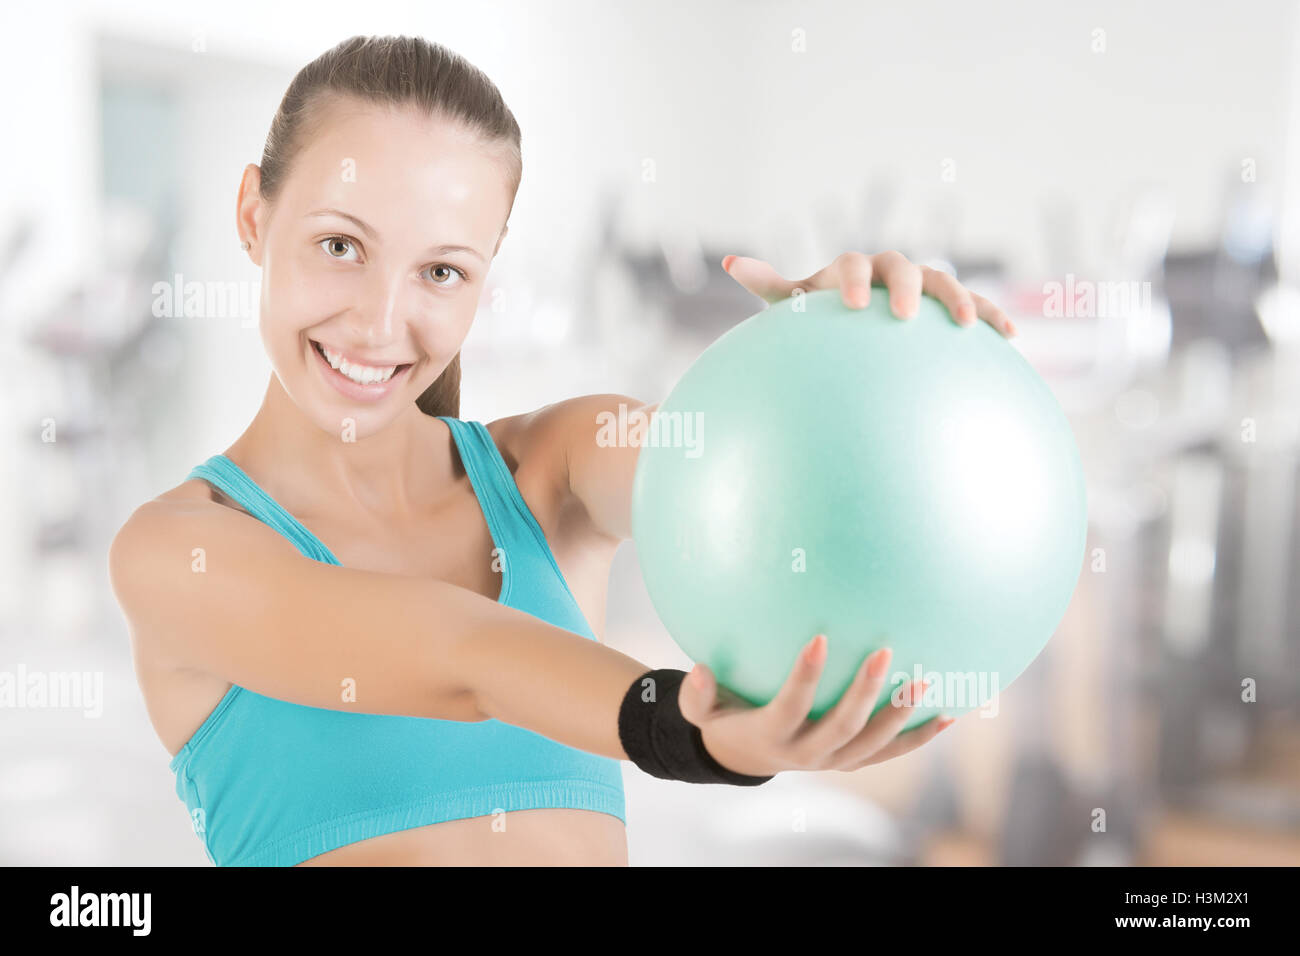 Fit woman standing and holding a pilates ball in a gym Stock Photo